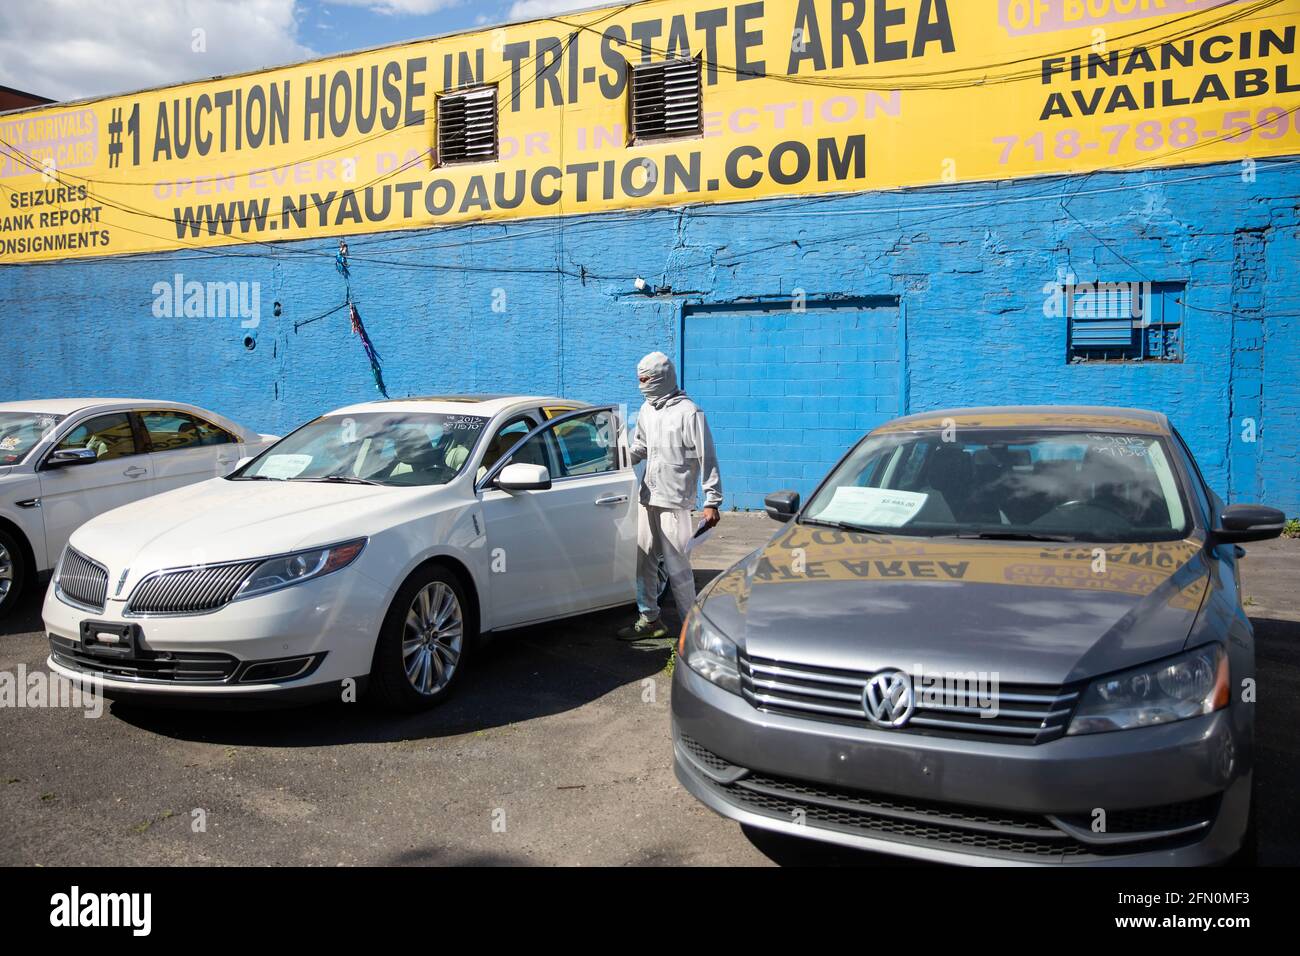 New York, USA. 12th May, 2021. A person shops for a used car at Hamilton Avenue Auto Sales, a used car dealership in the Brooklyn borough of New York, the United States, on May 12, 2021. U.S. consumer prices rose 0.8 percent in April, with a 12-month increase of 4.2 percent, the U.S. Labor Department reported Wednesday. This marked the largest 12-month growth since a 4.9-percent increase for the period ending September 2008, according to the report. Credit: Michael Nagle/Xinhua/Alamy Live News Stock Photo